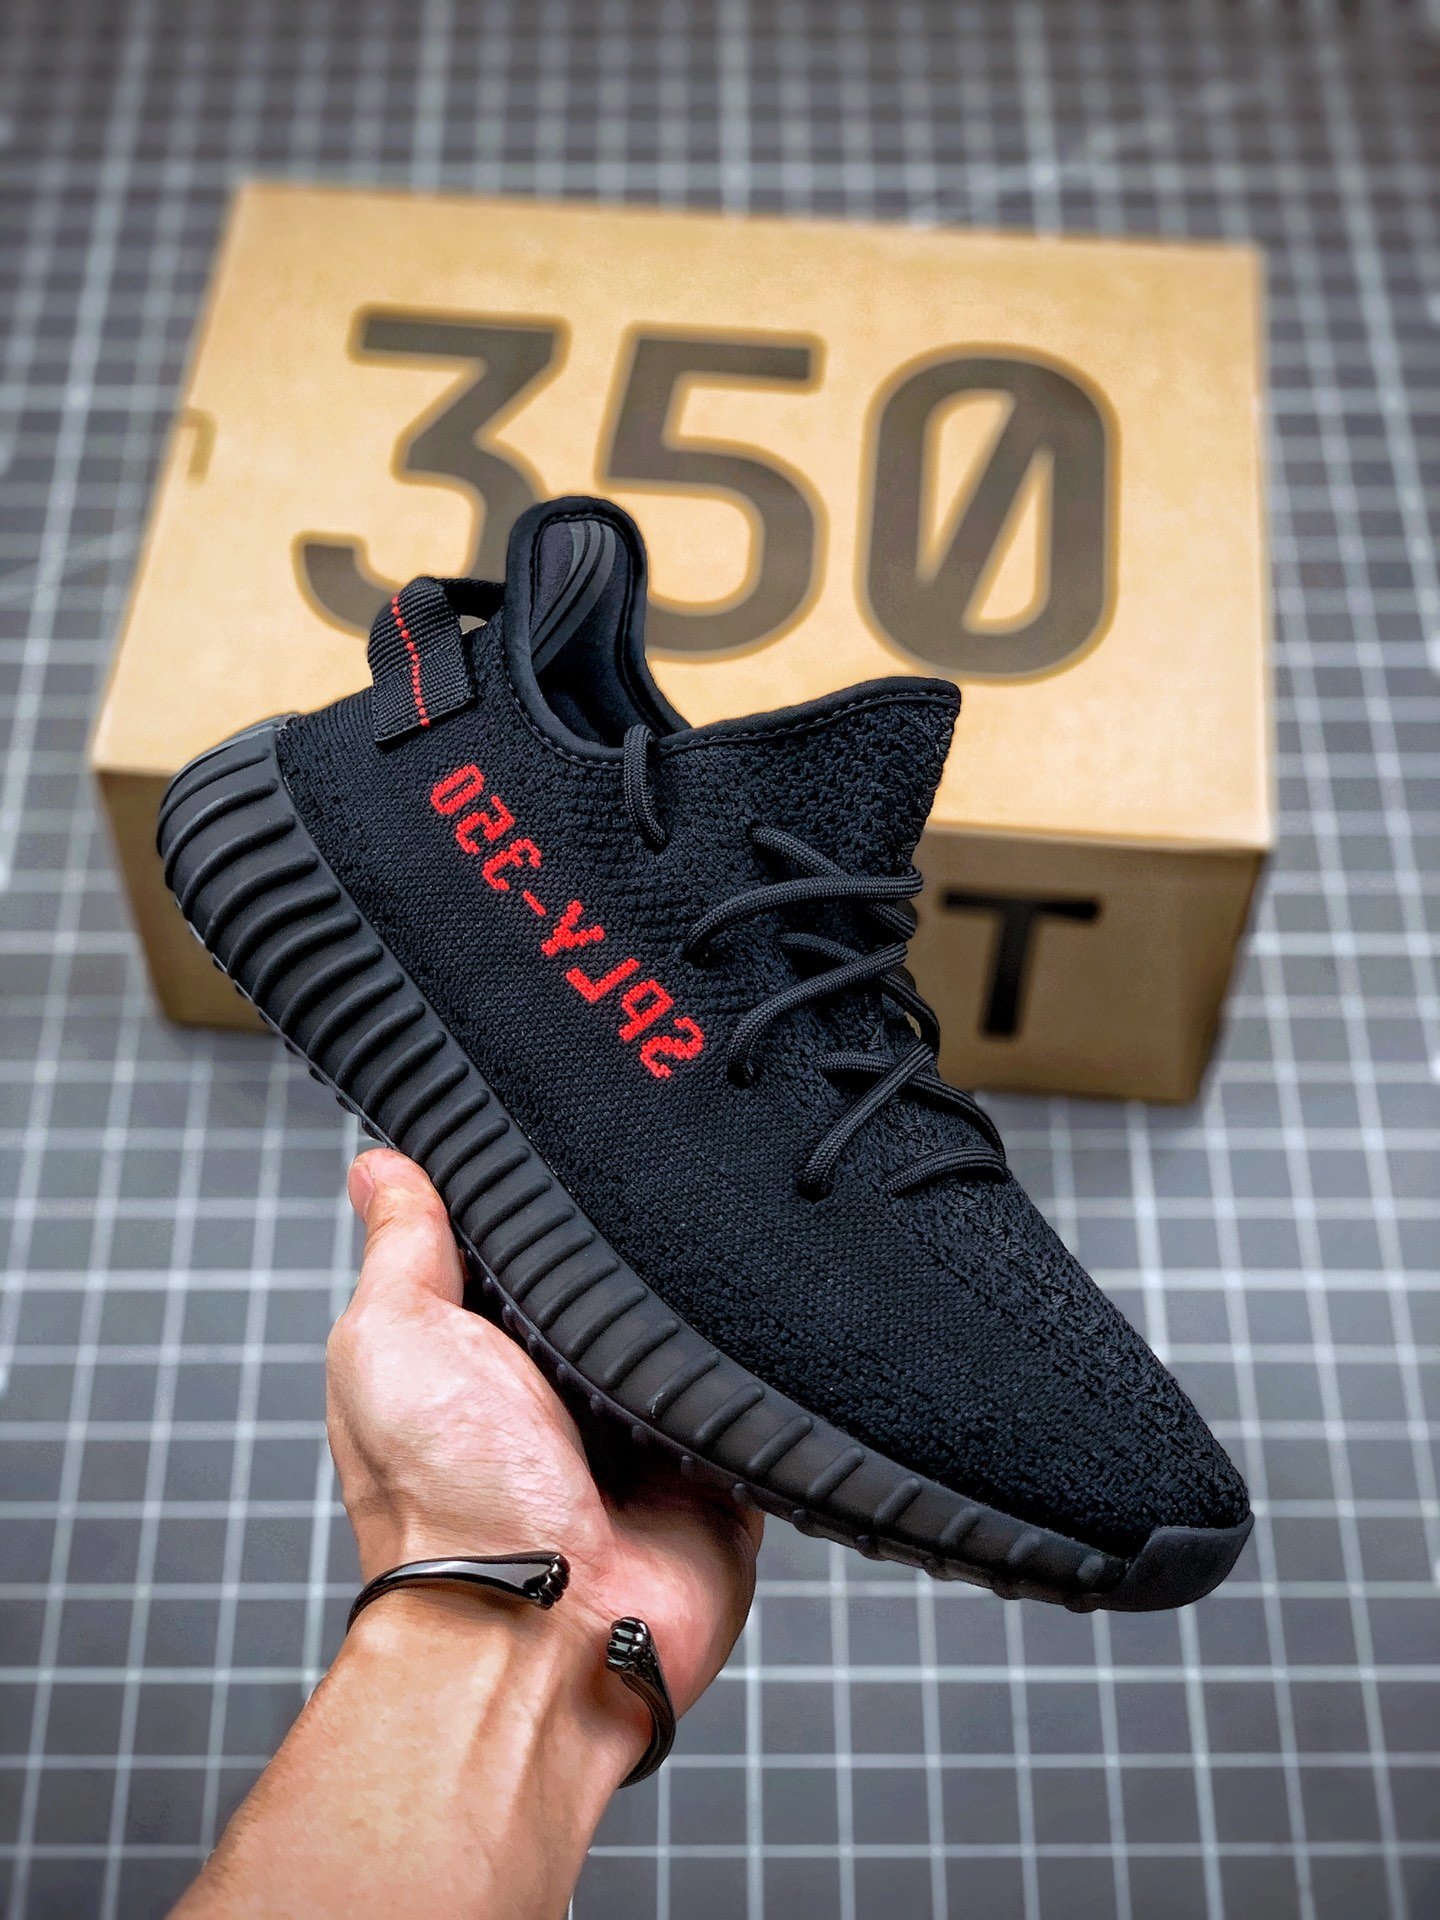 adidas Yeezy Boost 350 V2 “Bred” CP9652 For Sale – Sneaker Hello